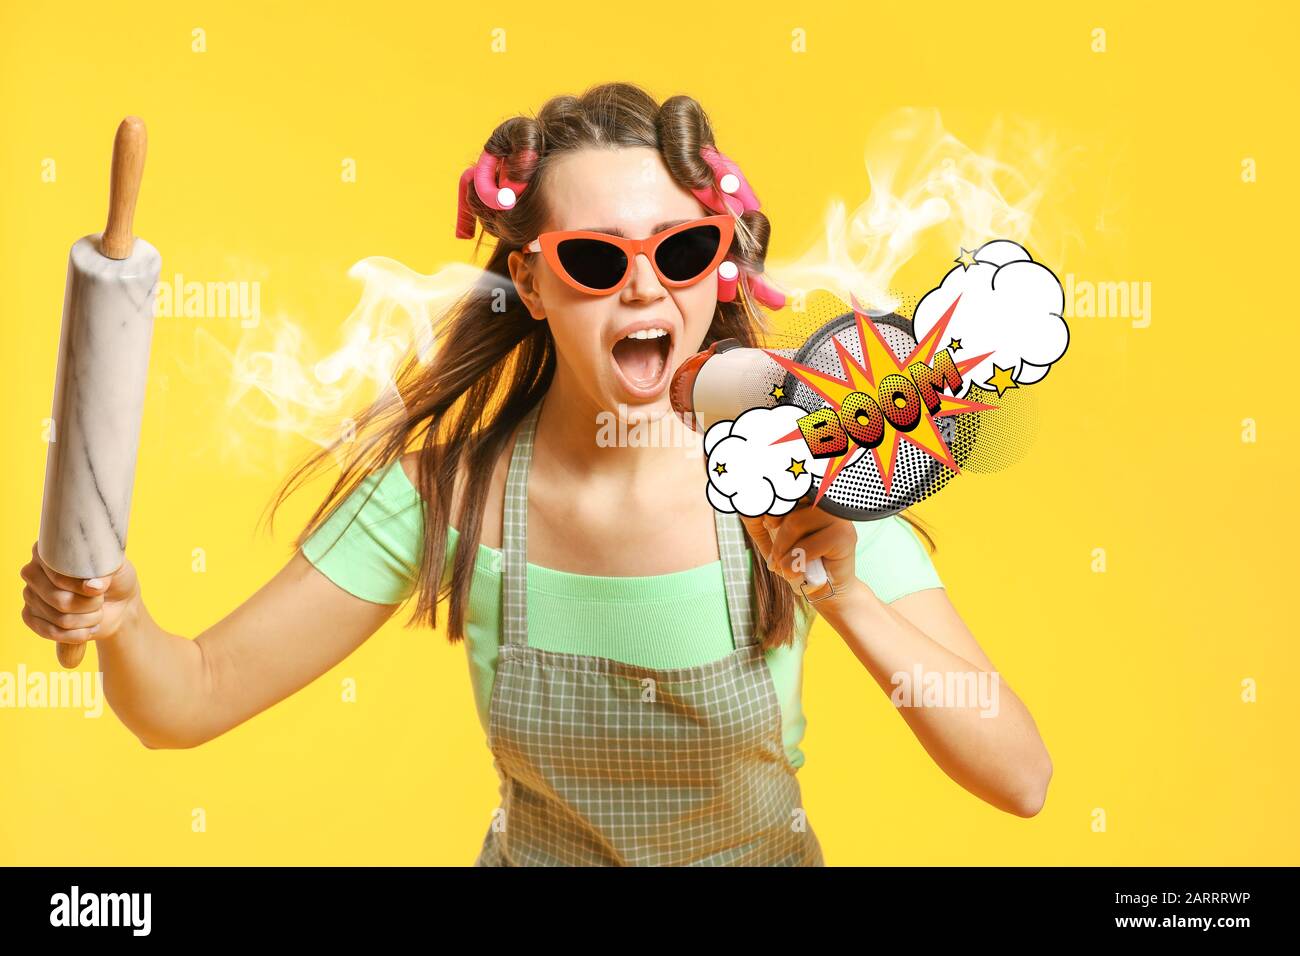 Funny housewife with steam coming out of ears, rolling pin and megaphone on color background Stock Photo